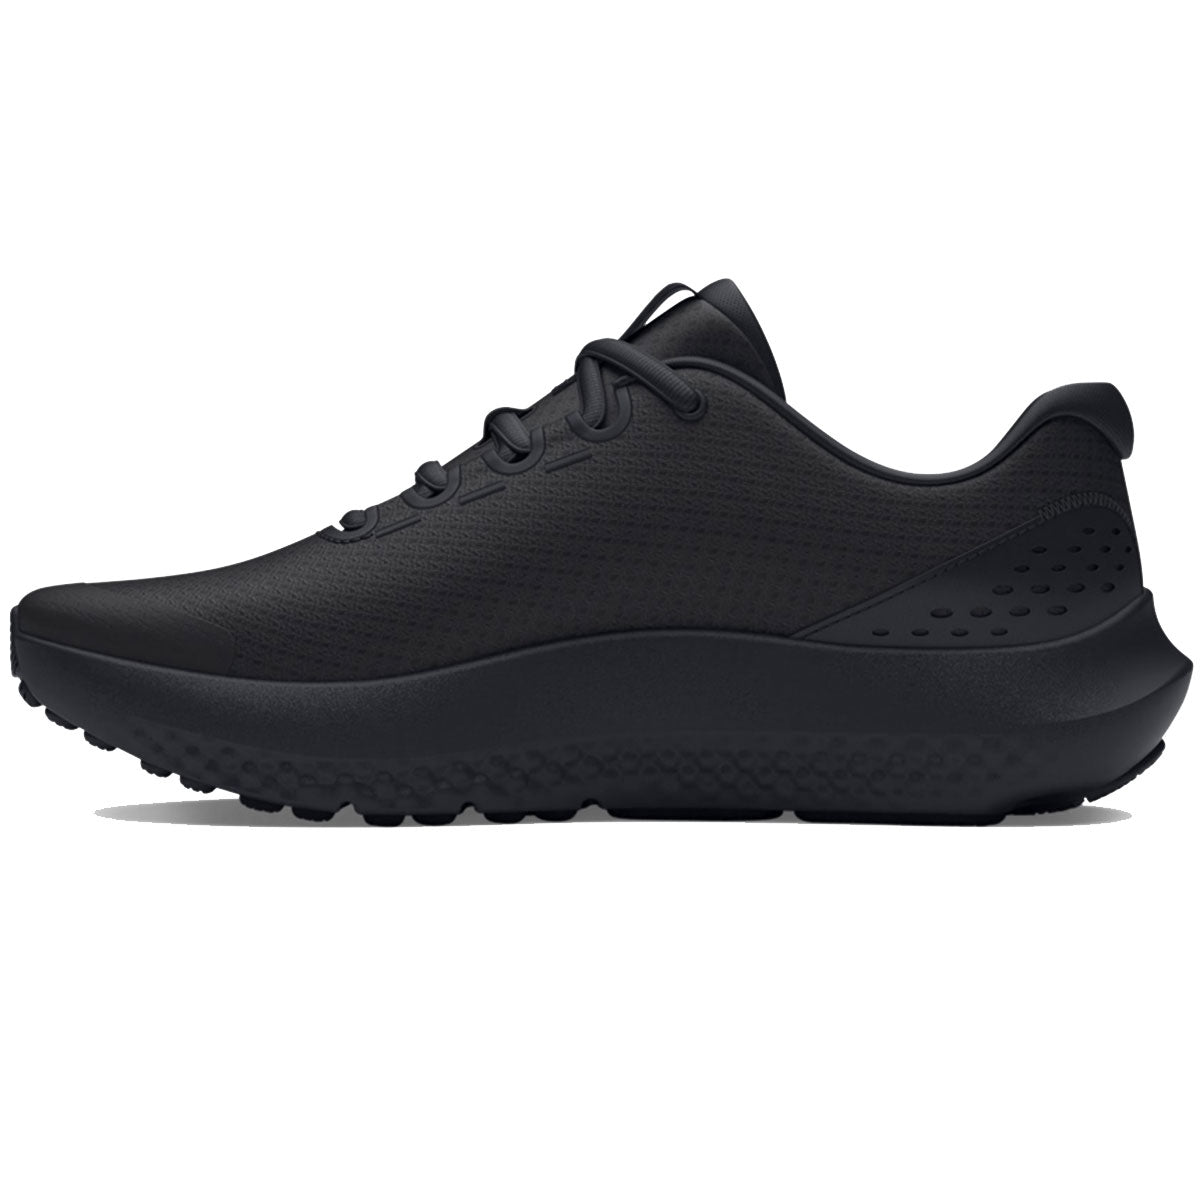 Under Armour BGS Surge 4 Running Shoes - Boys - Black